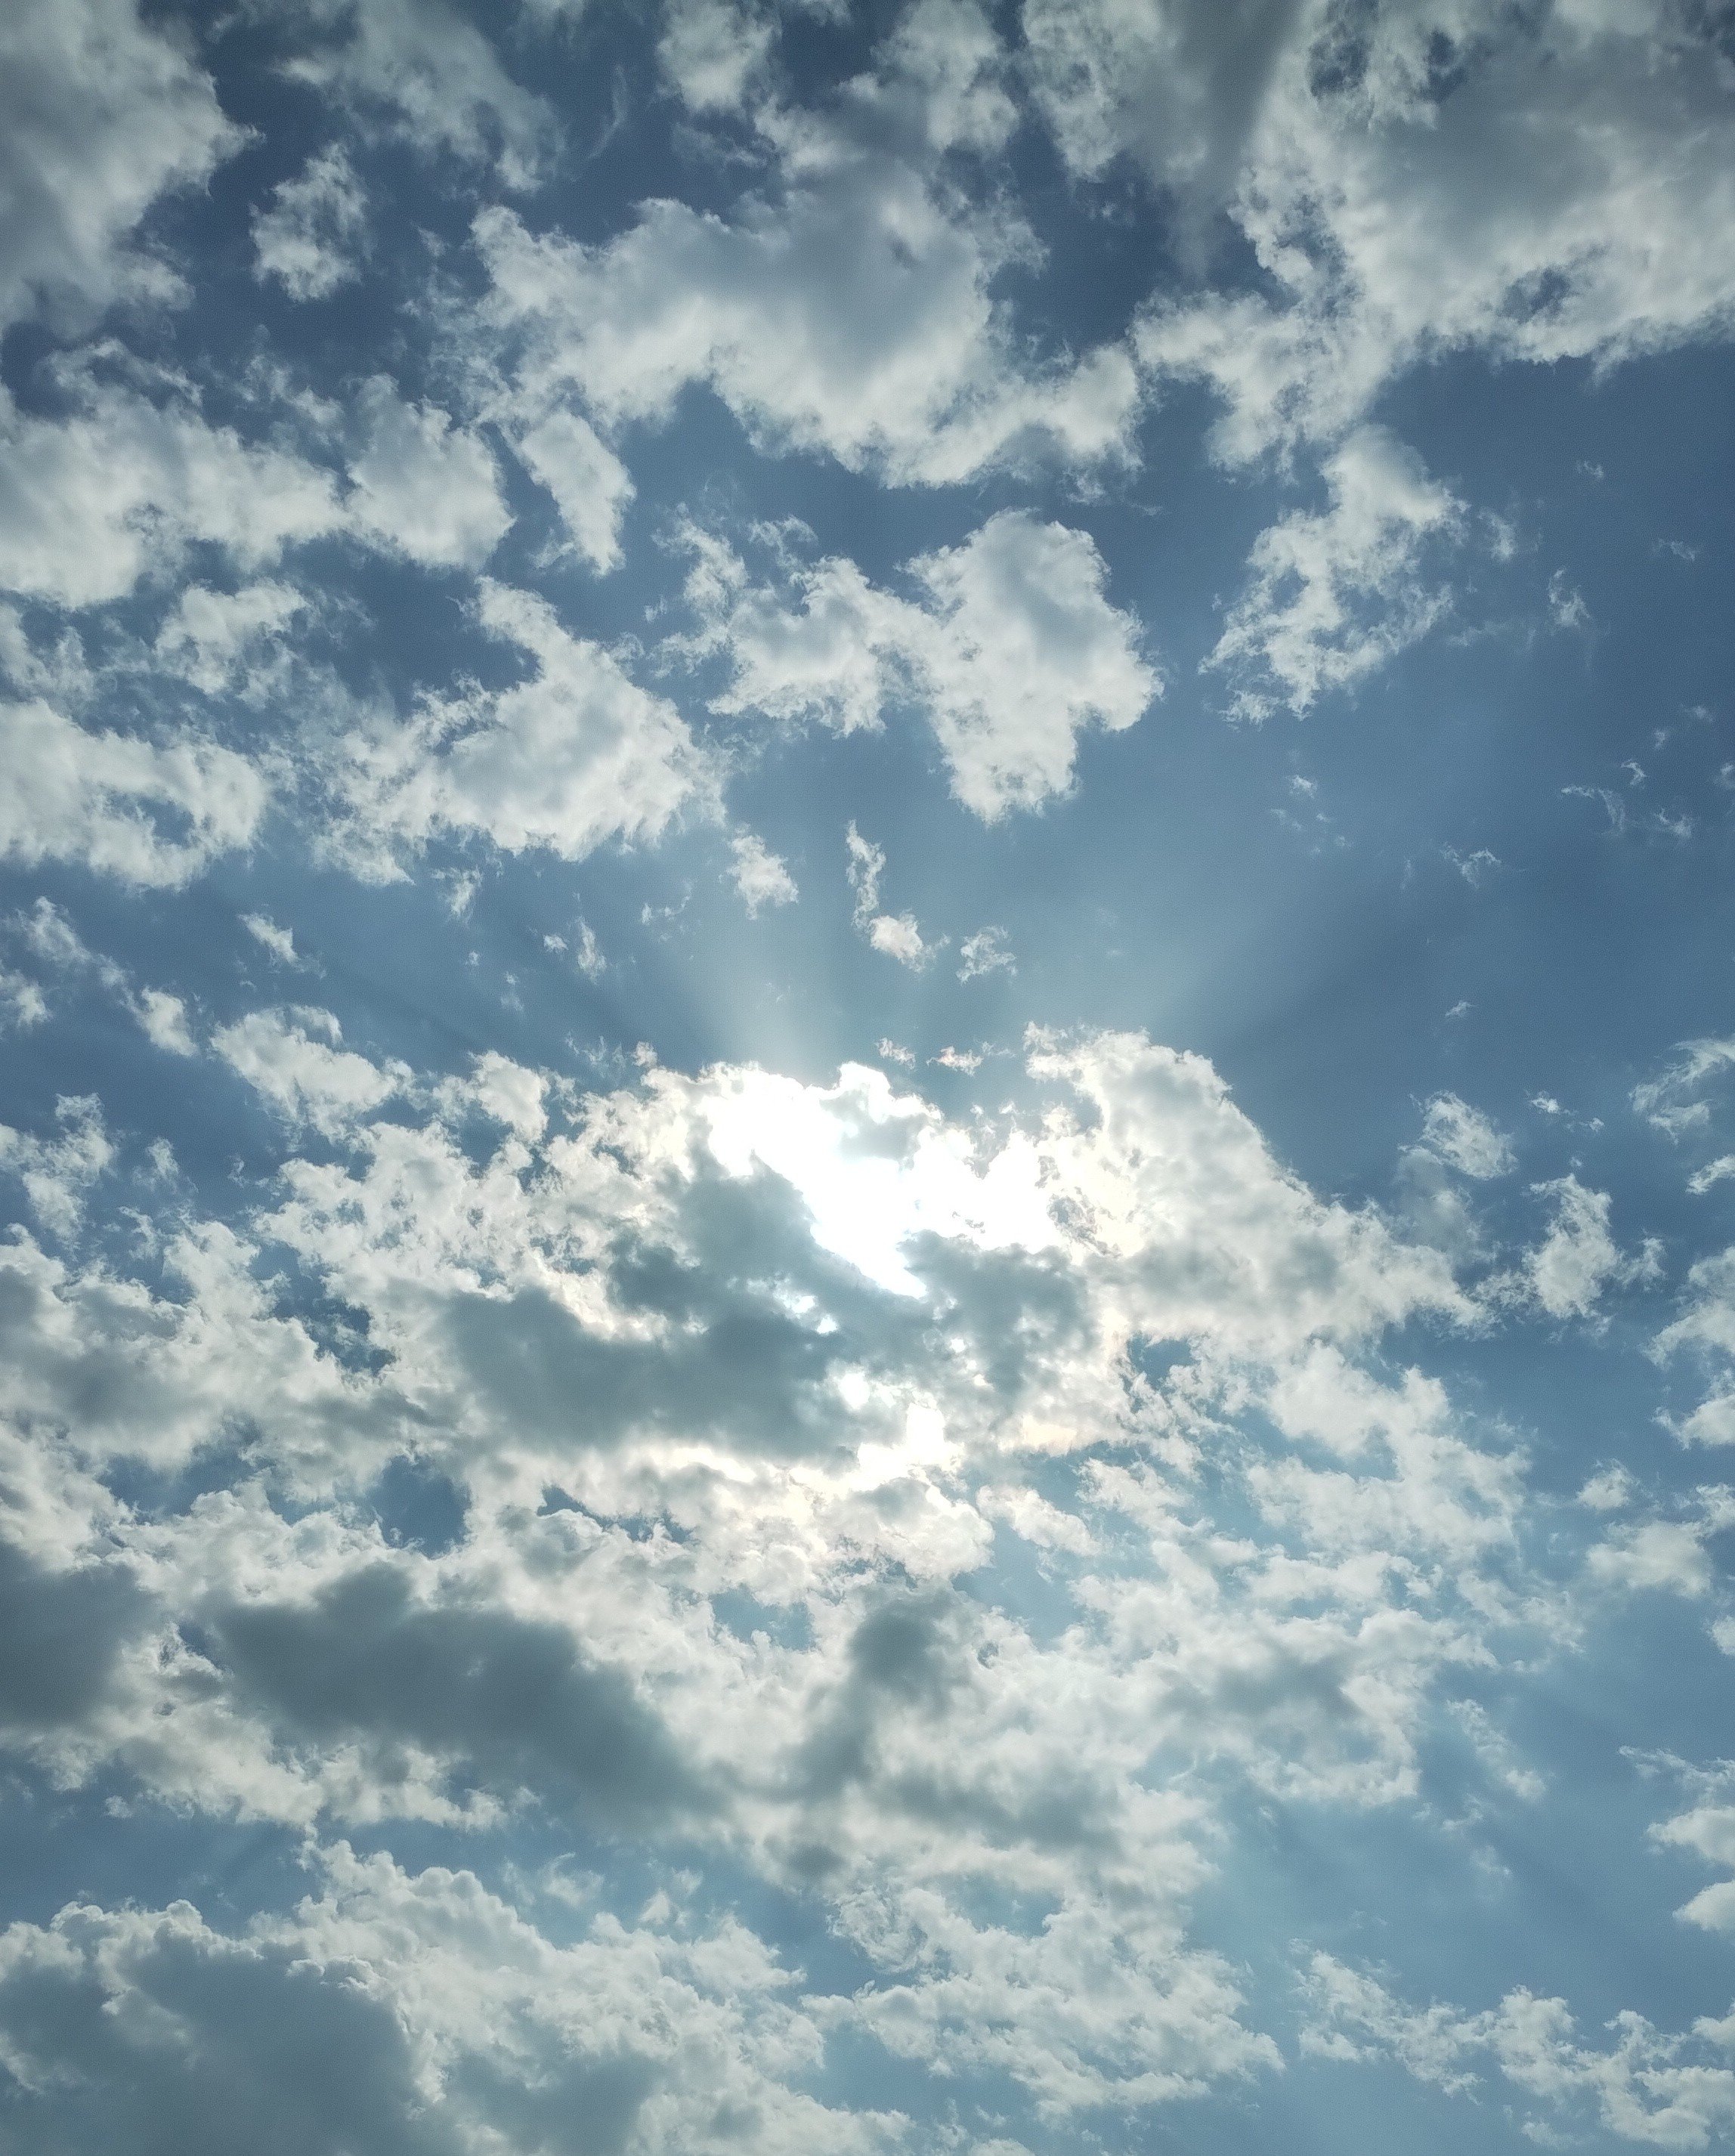 Photograph of the sky, with some sunlight peaking through the middle.